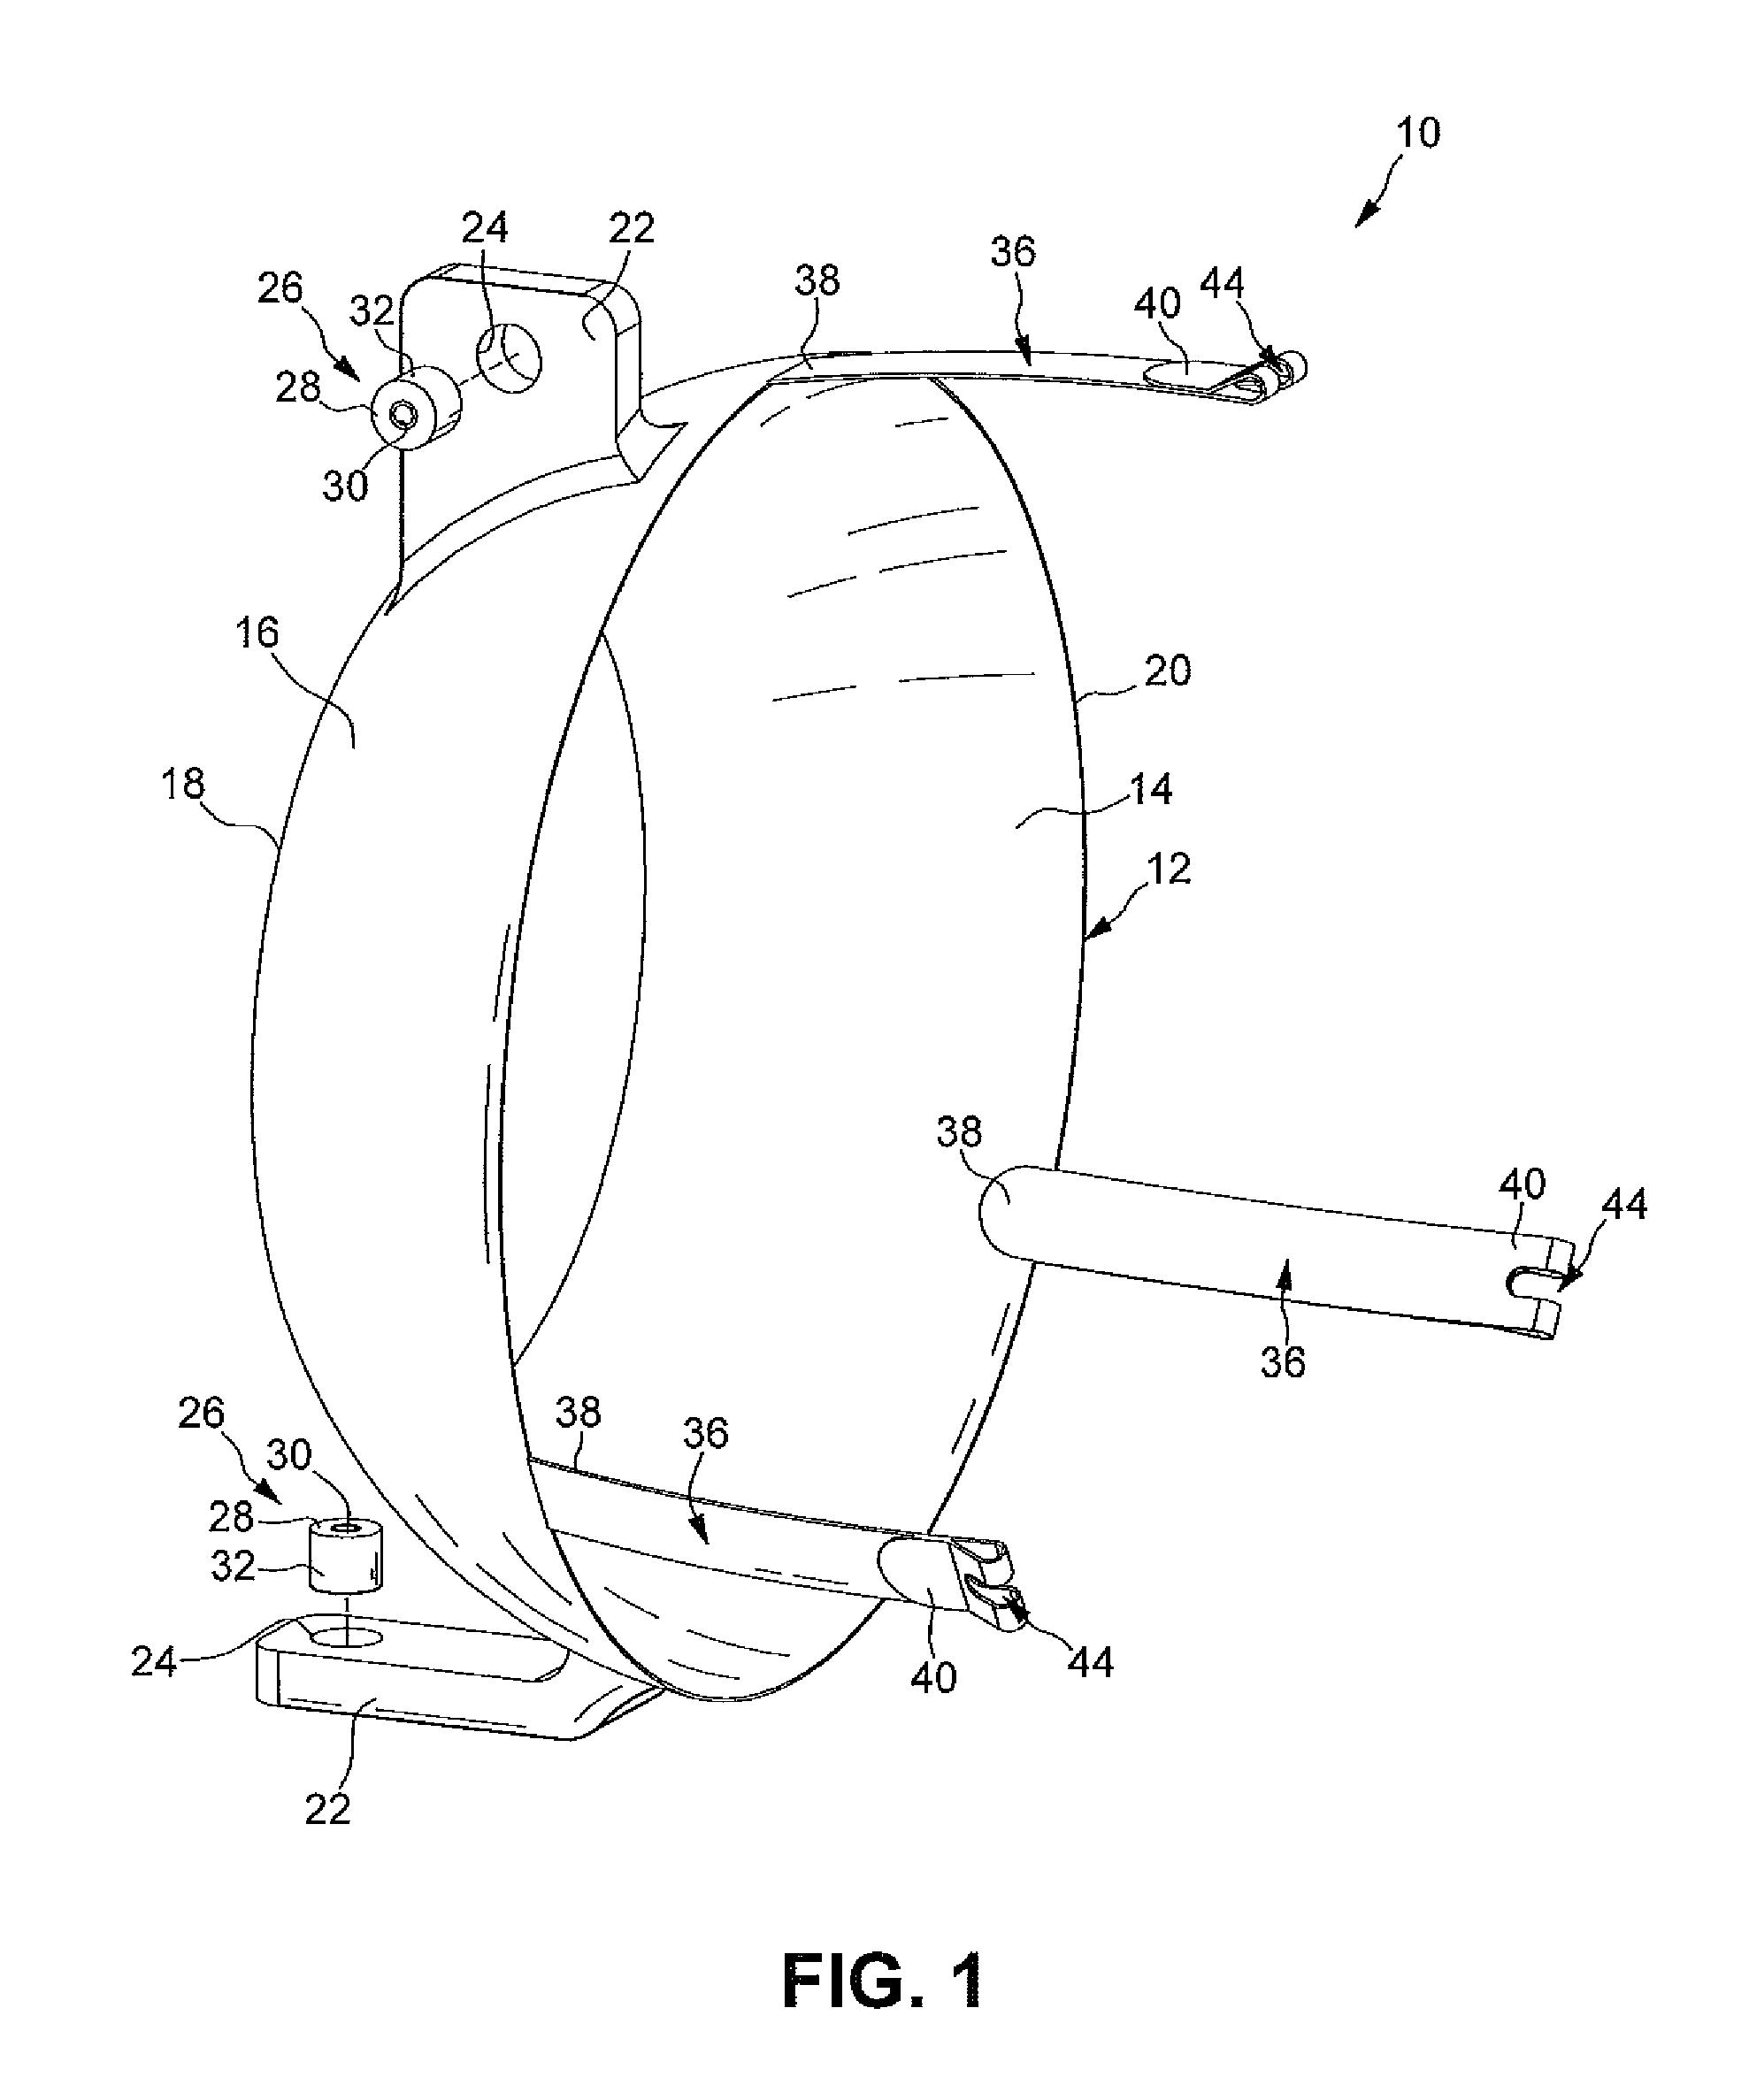 High pressure vessel with integrated mounting features